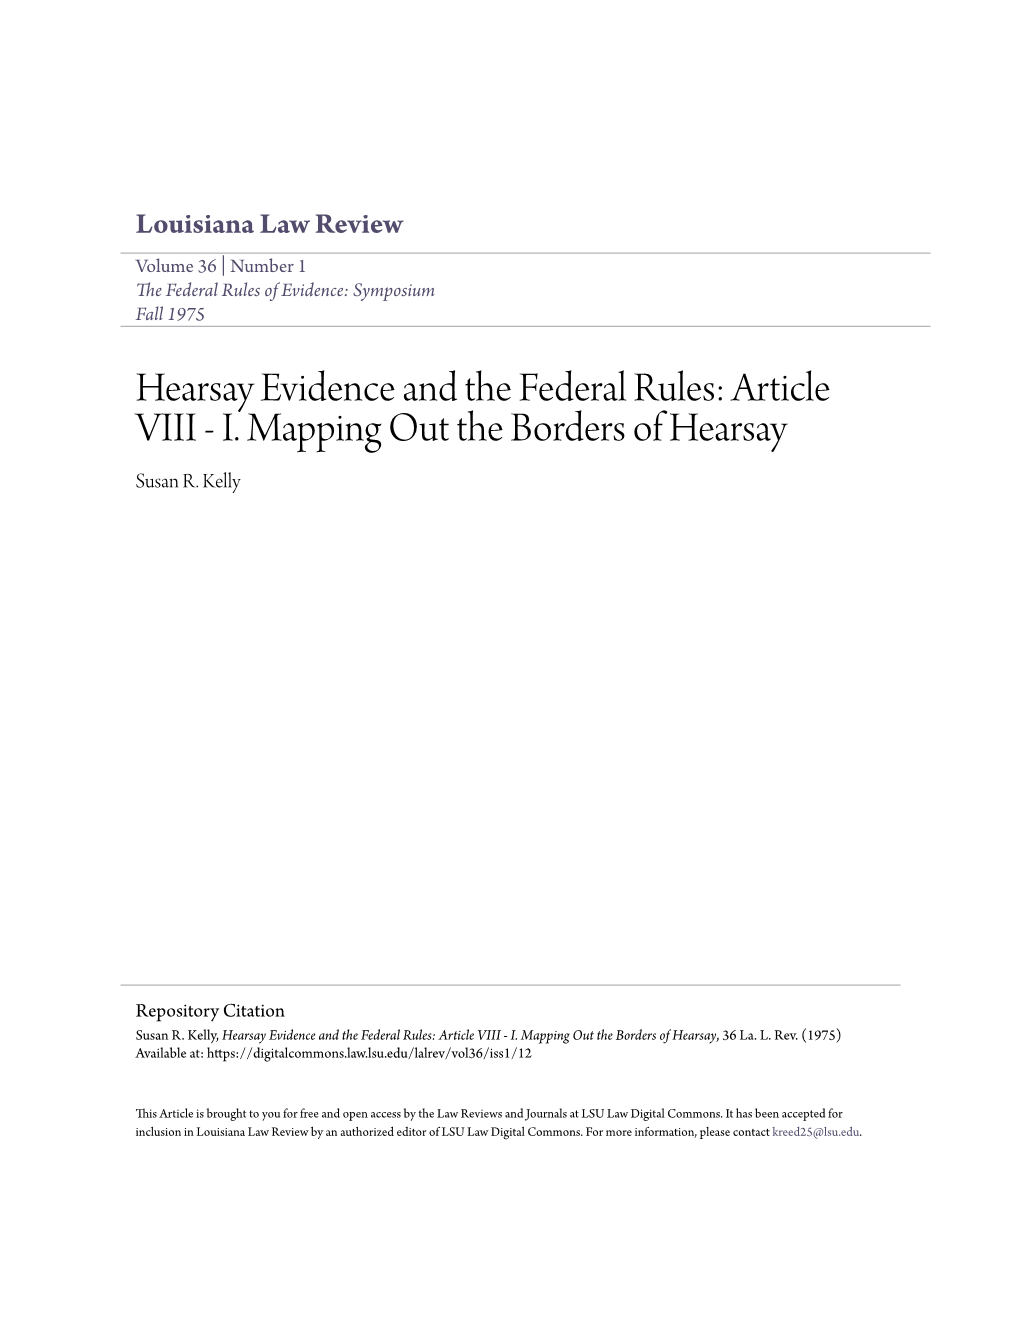 Hearsay Evidence and the Federal Rules: Article VIII - I